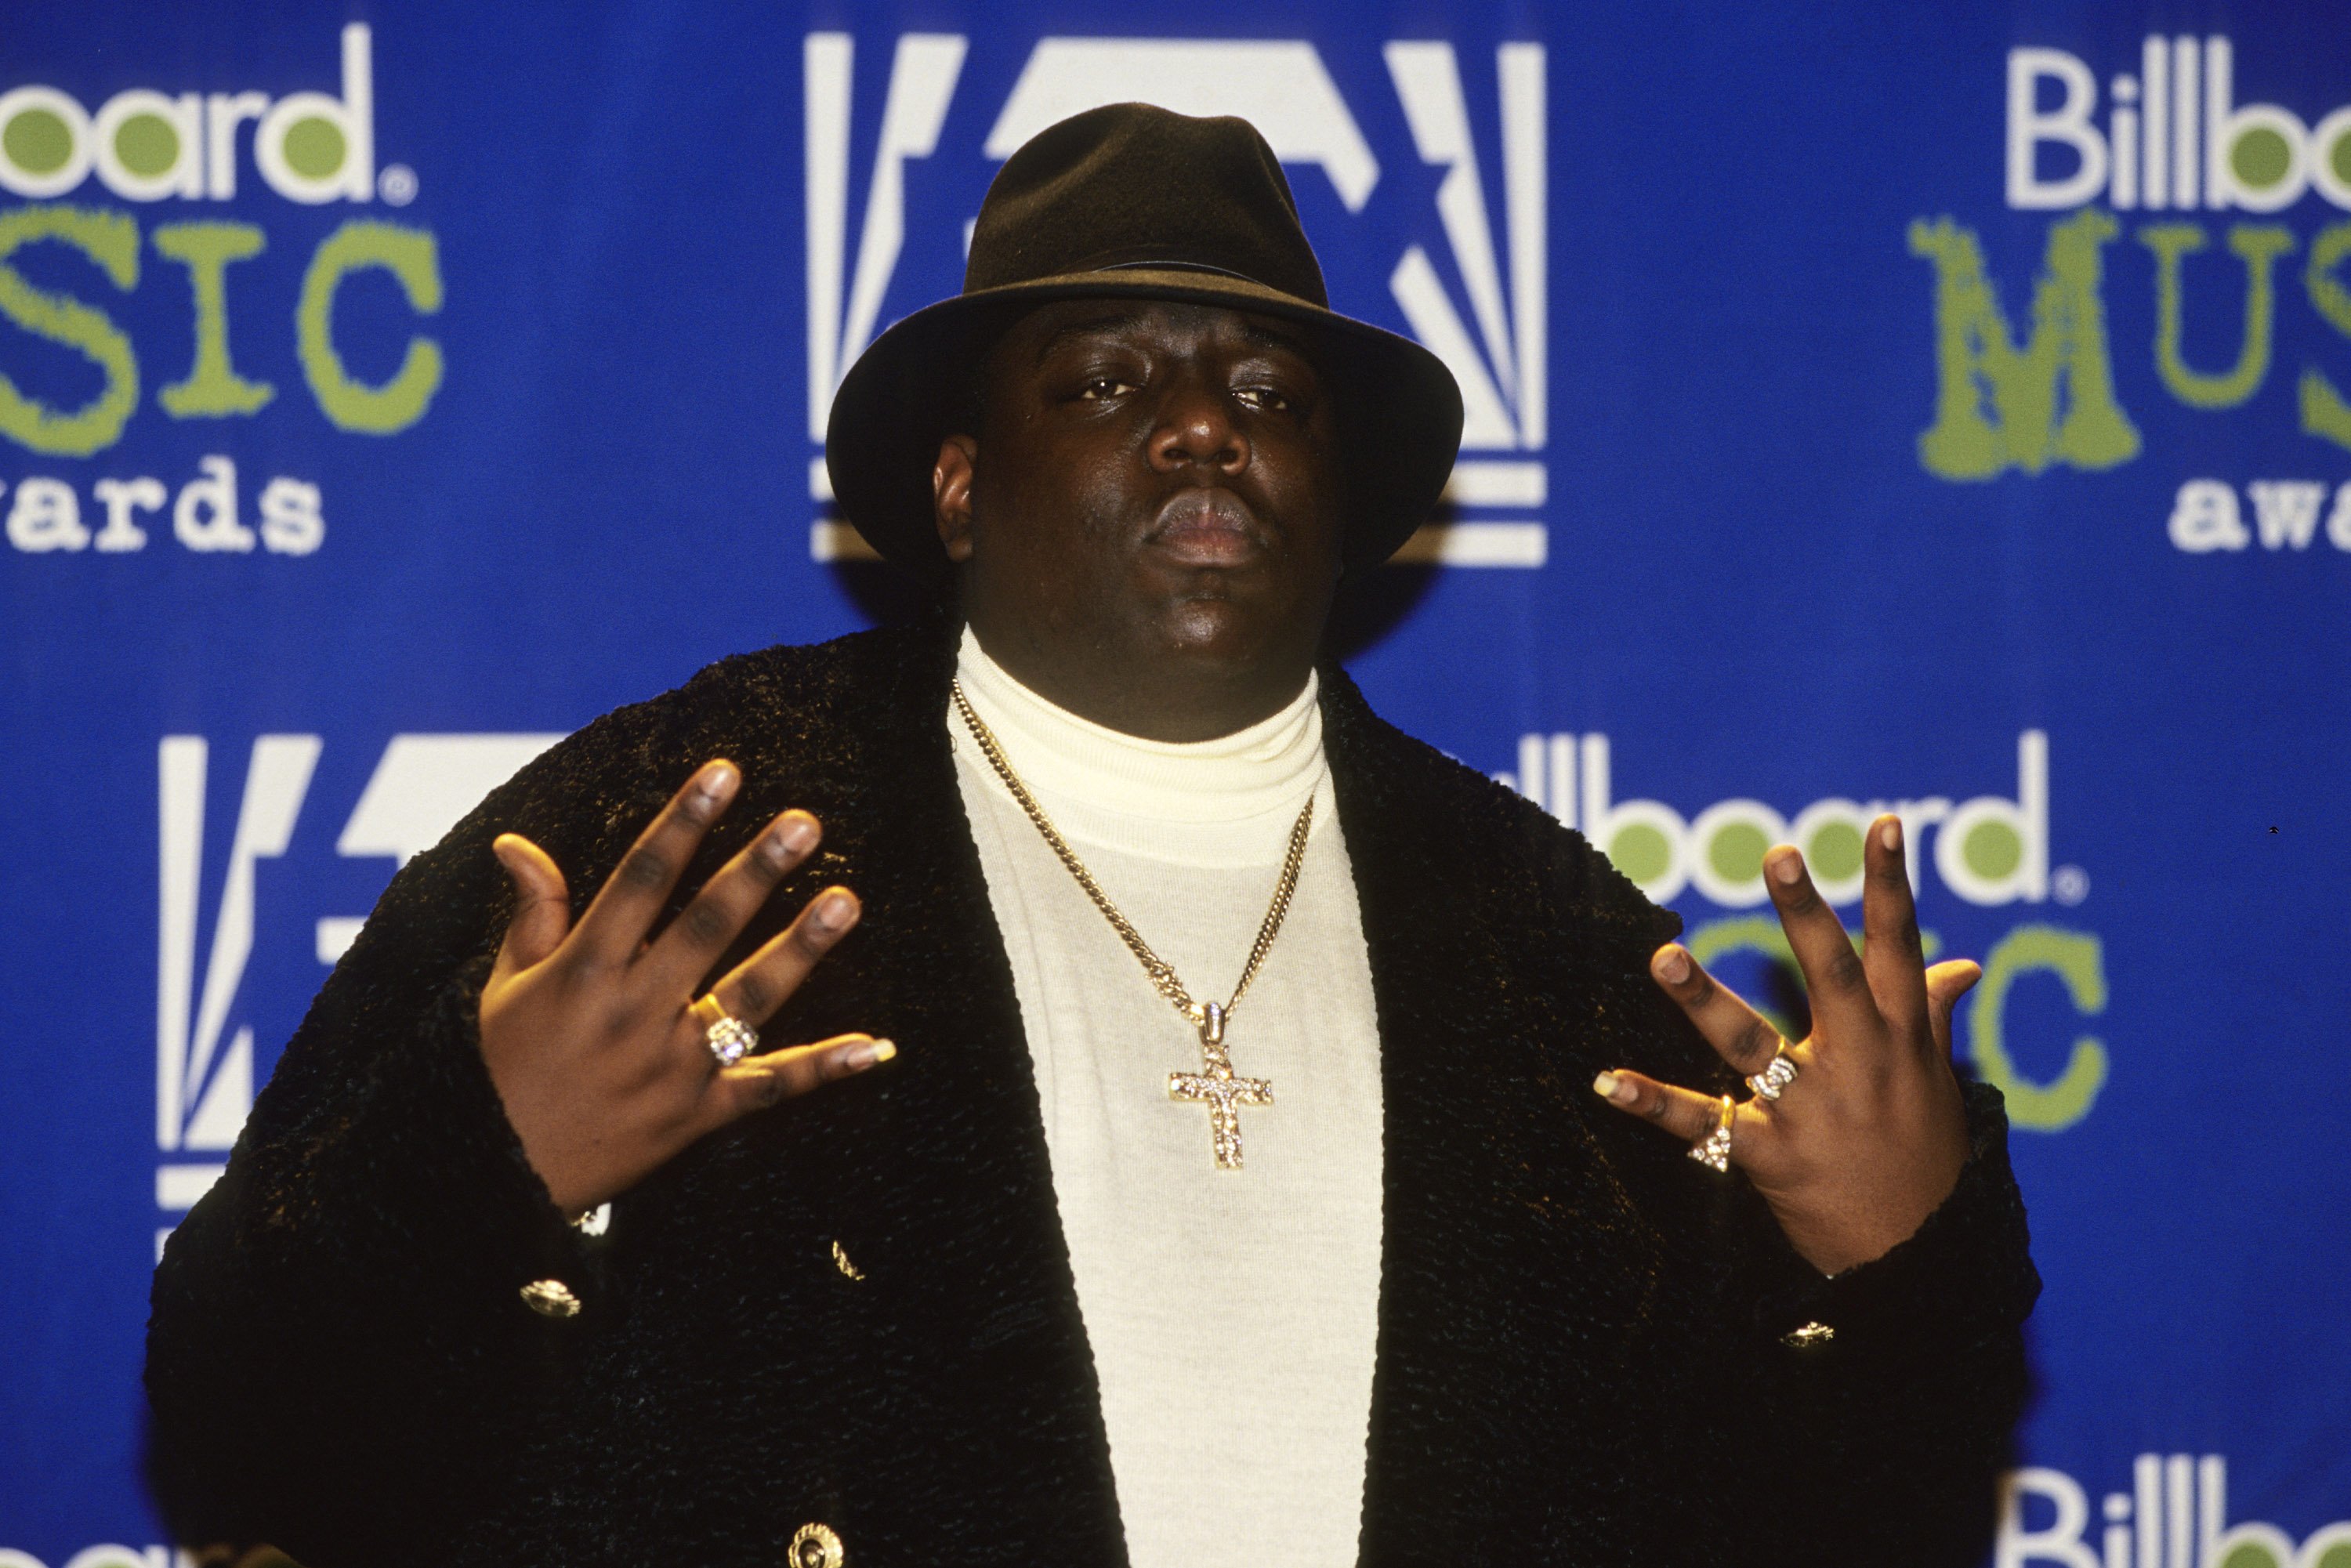 Notorious B.I.G. at the 1995 Billboard Music Awards on December 6, 1996. | Photo: Getty Images